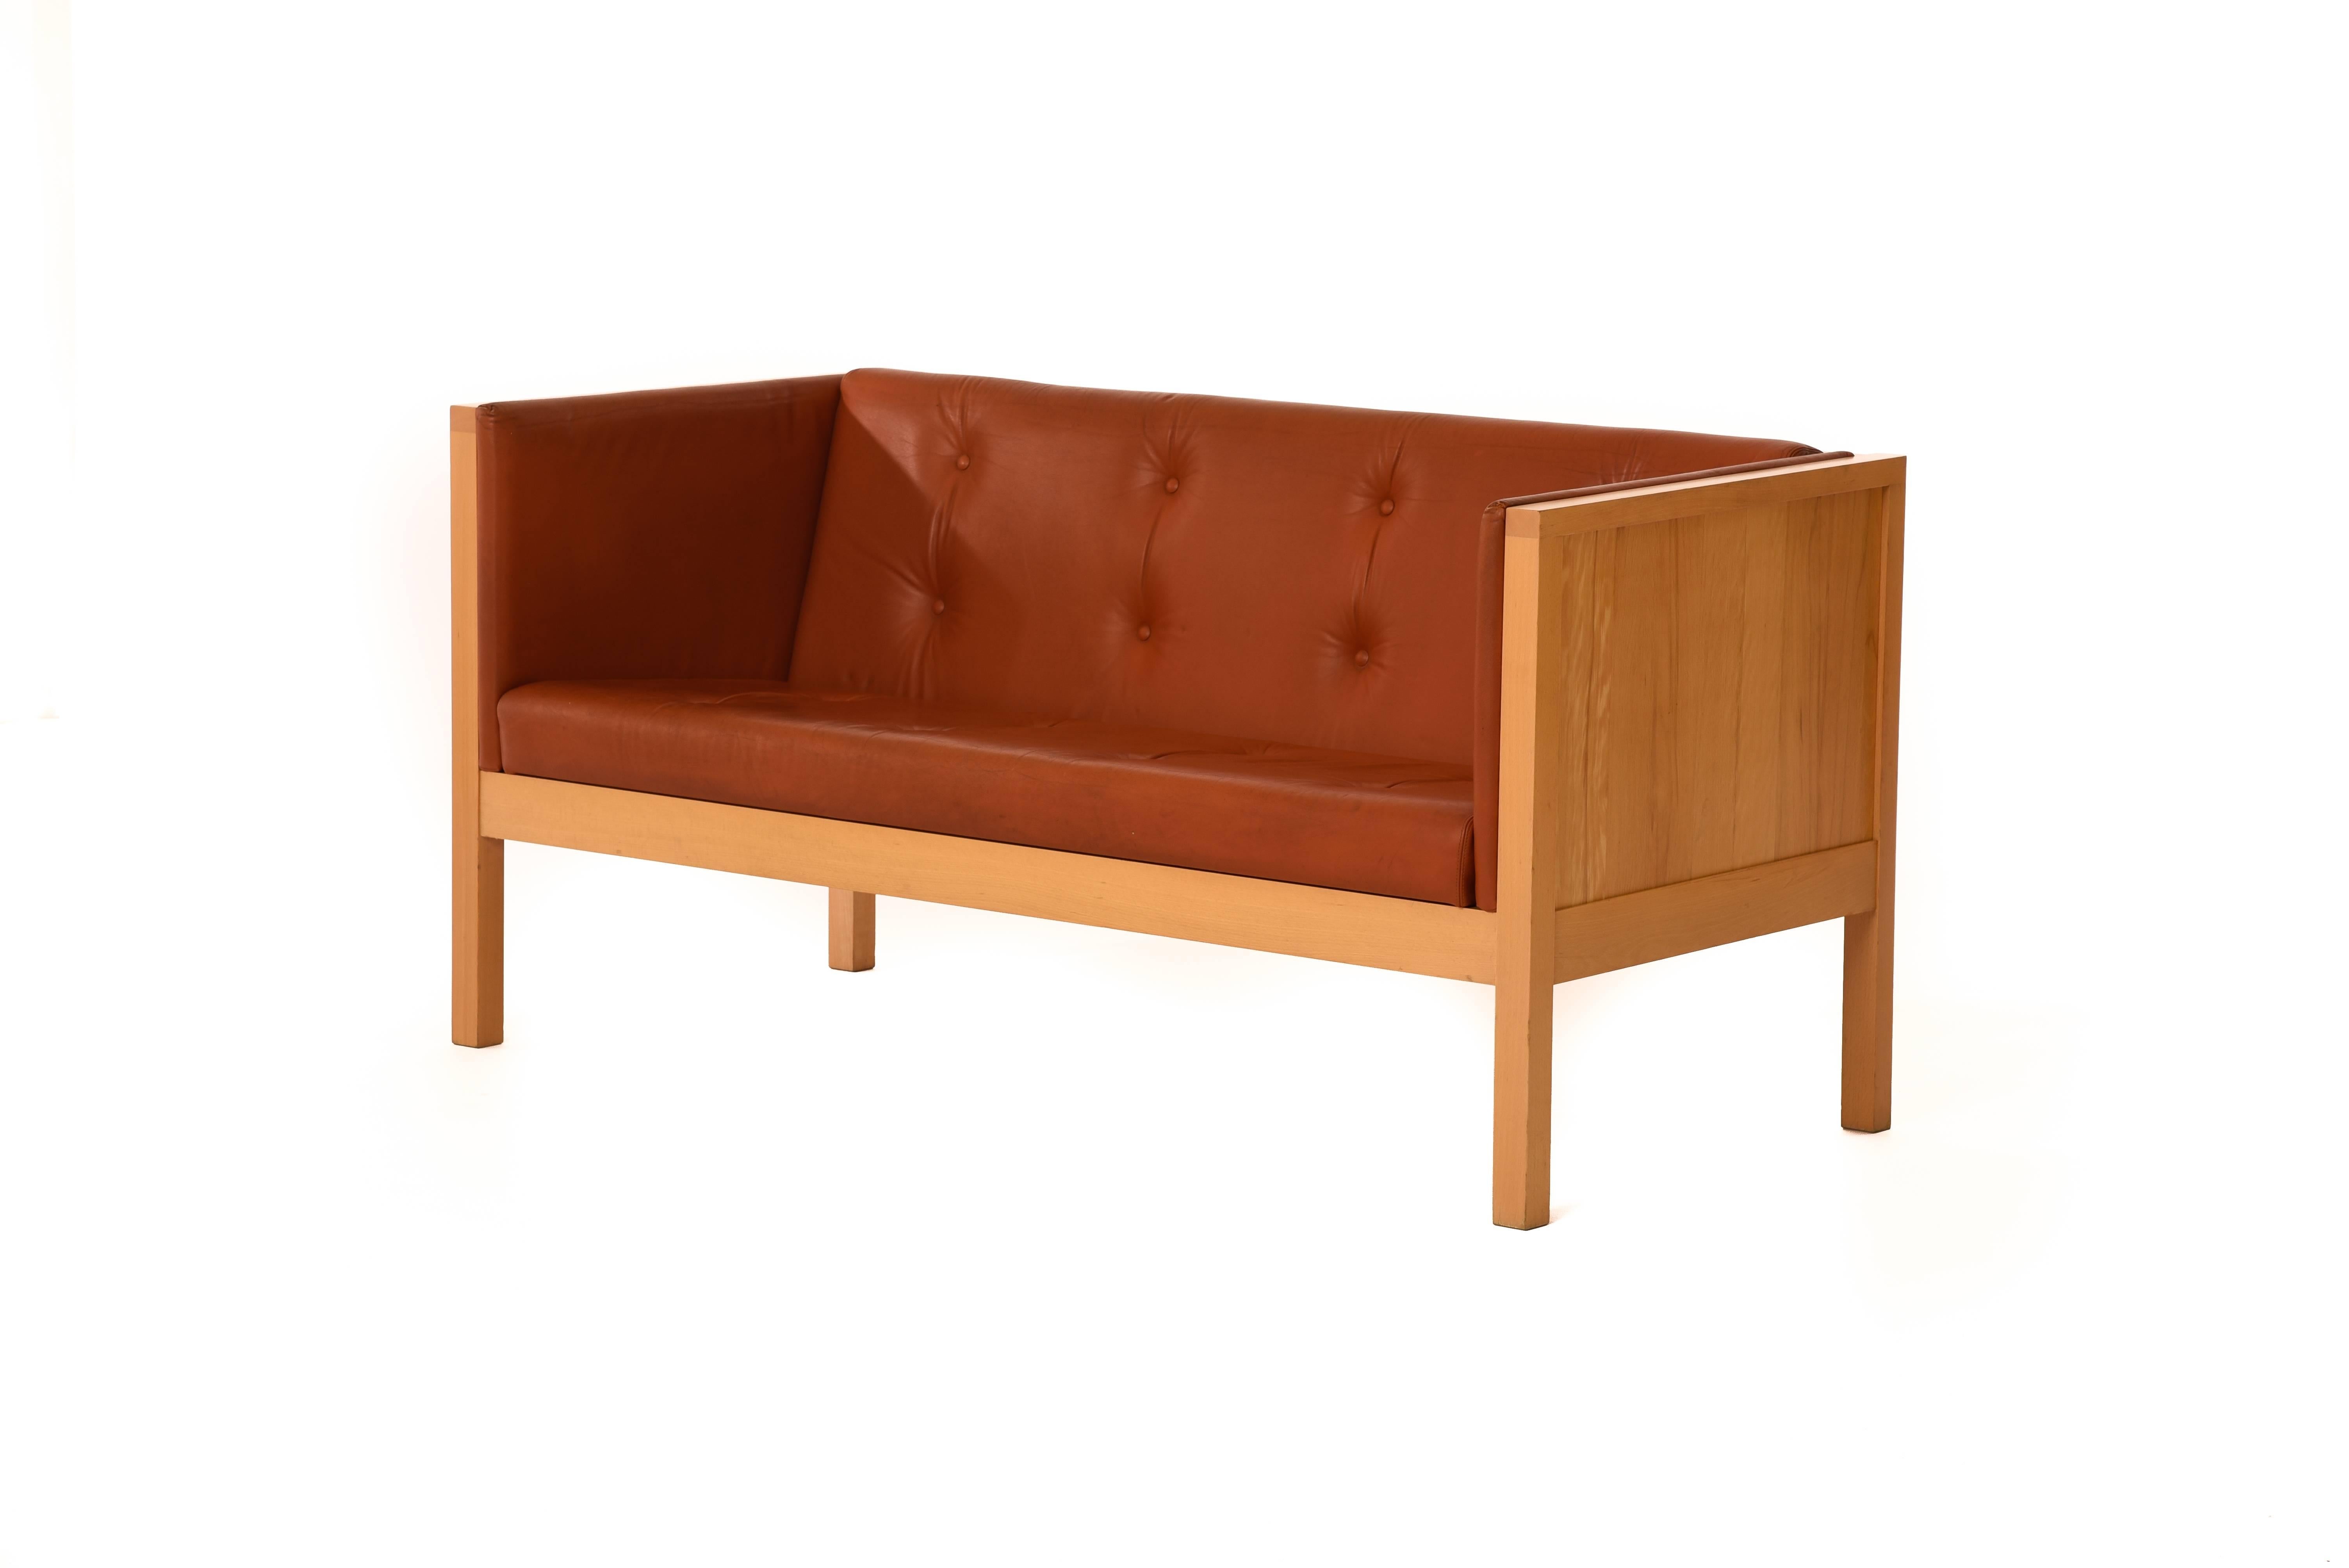 Scandinavian Modern beech panelled sofa produced by Swedish manufacturer Garsnas. Vintage original tufted leather upholstery.

Professional, skilled furniture restoration is an integral part of what we do every day. Our goal 
is to provide